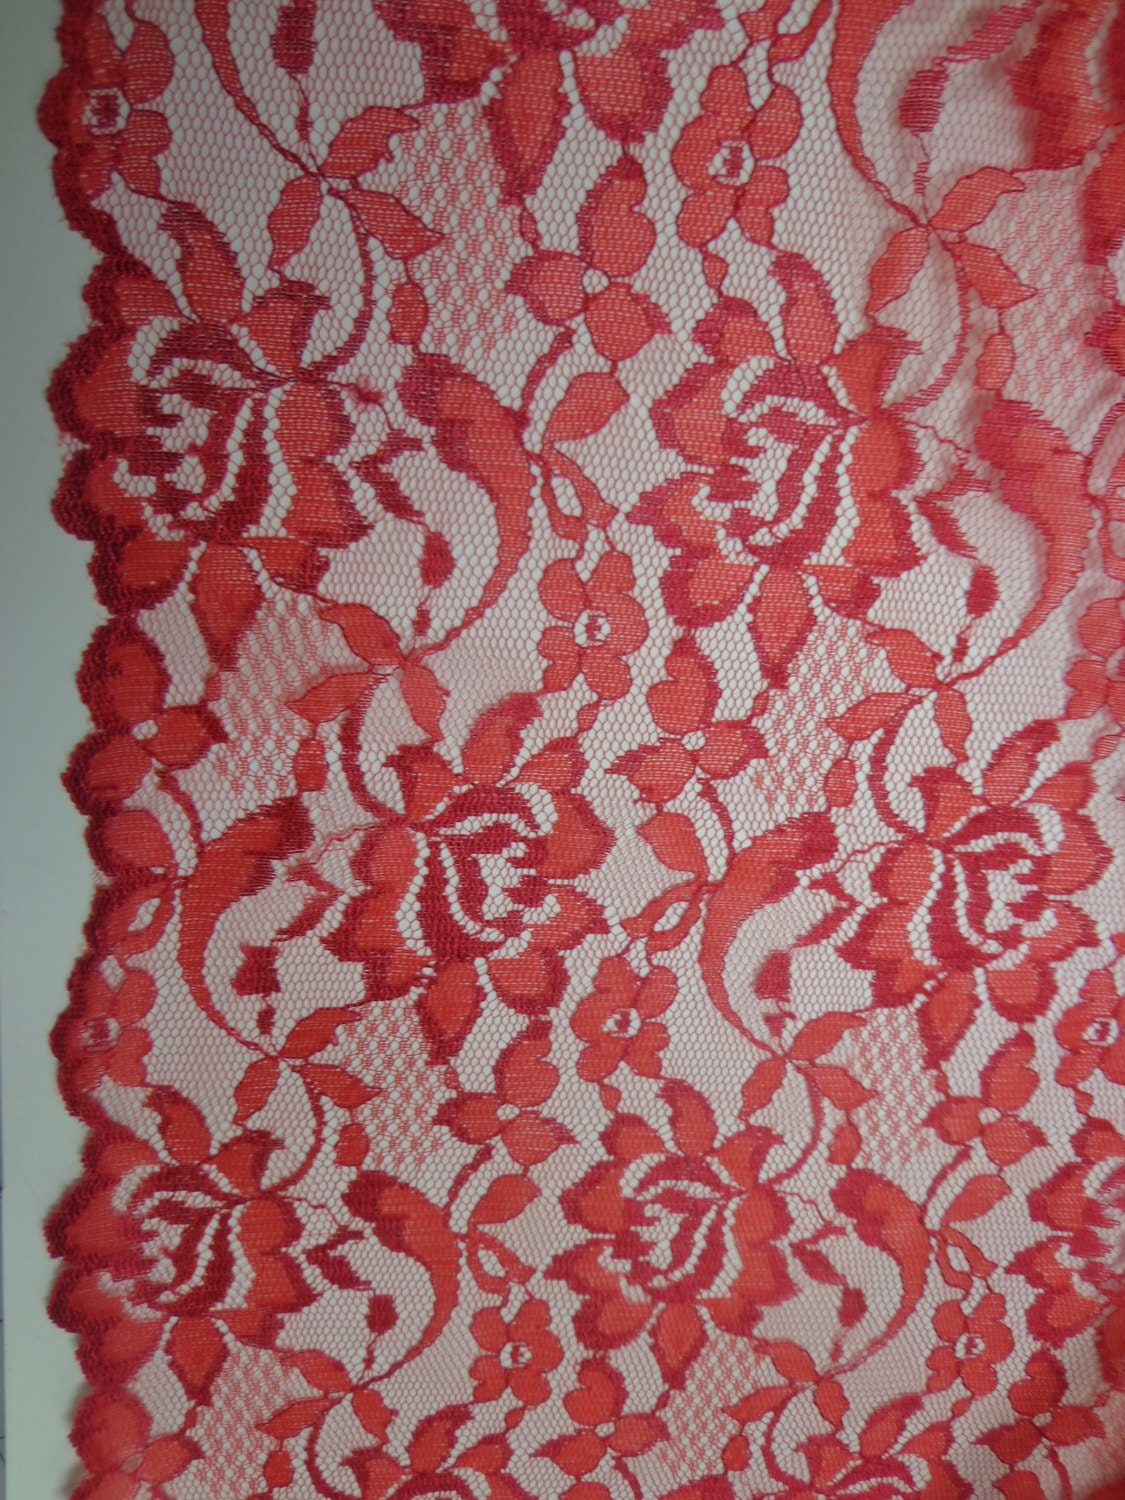 Red Galloon Floral Lace Fabric from TrinaFabrics on Etsy Studio